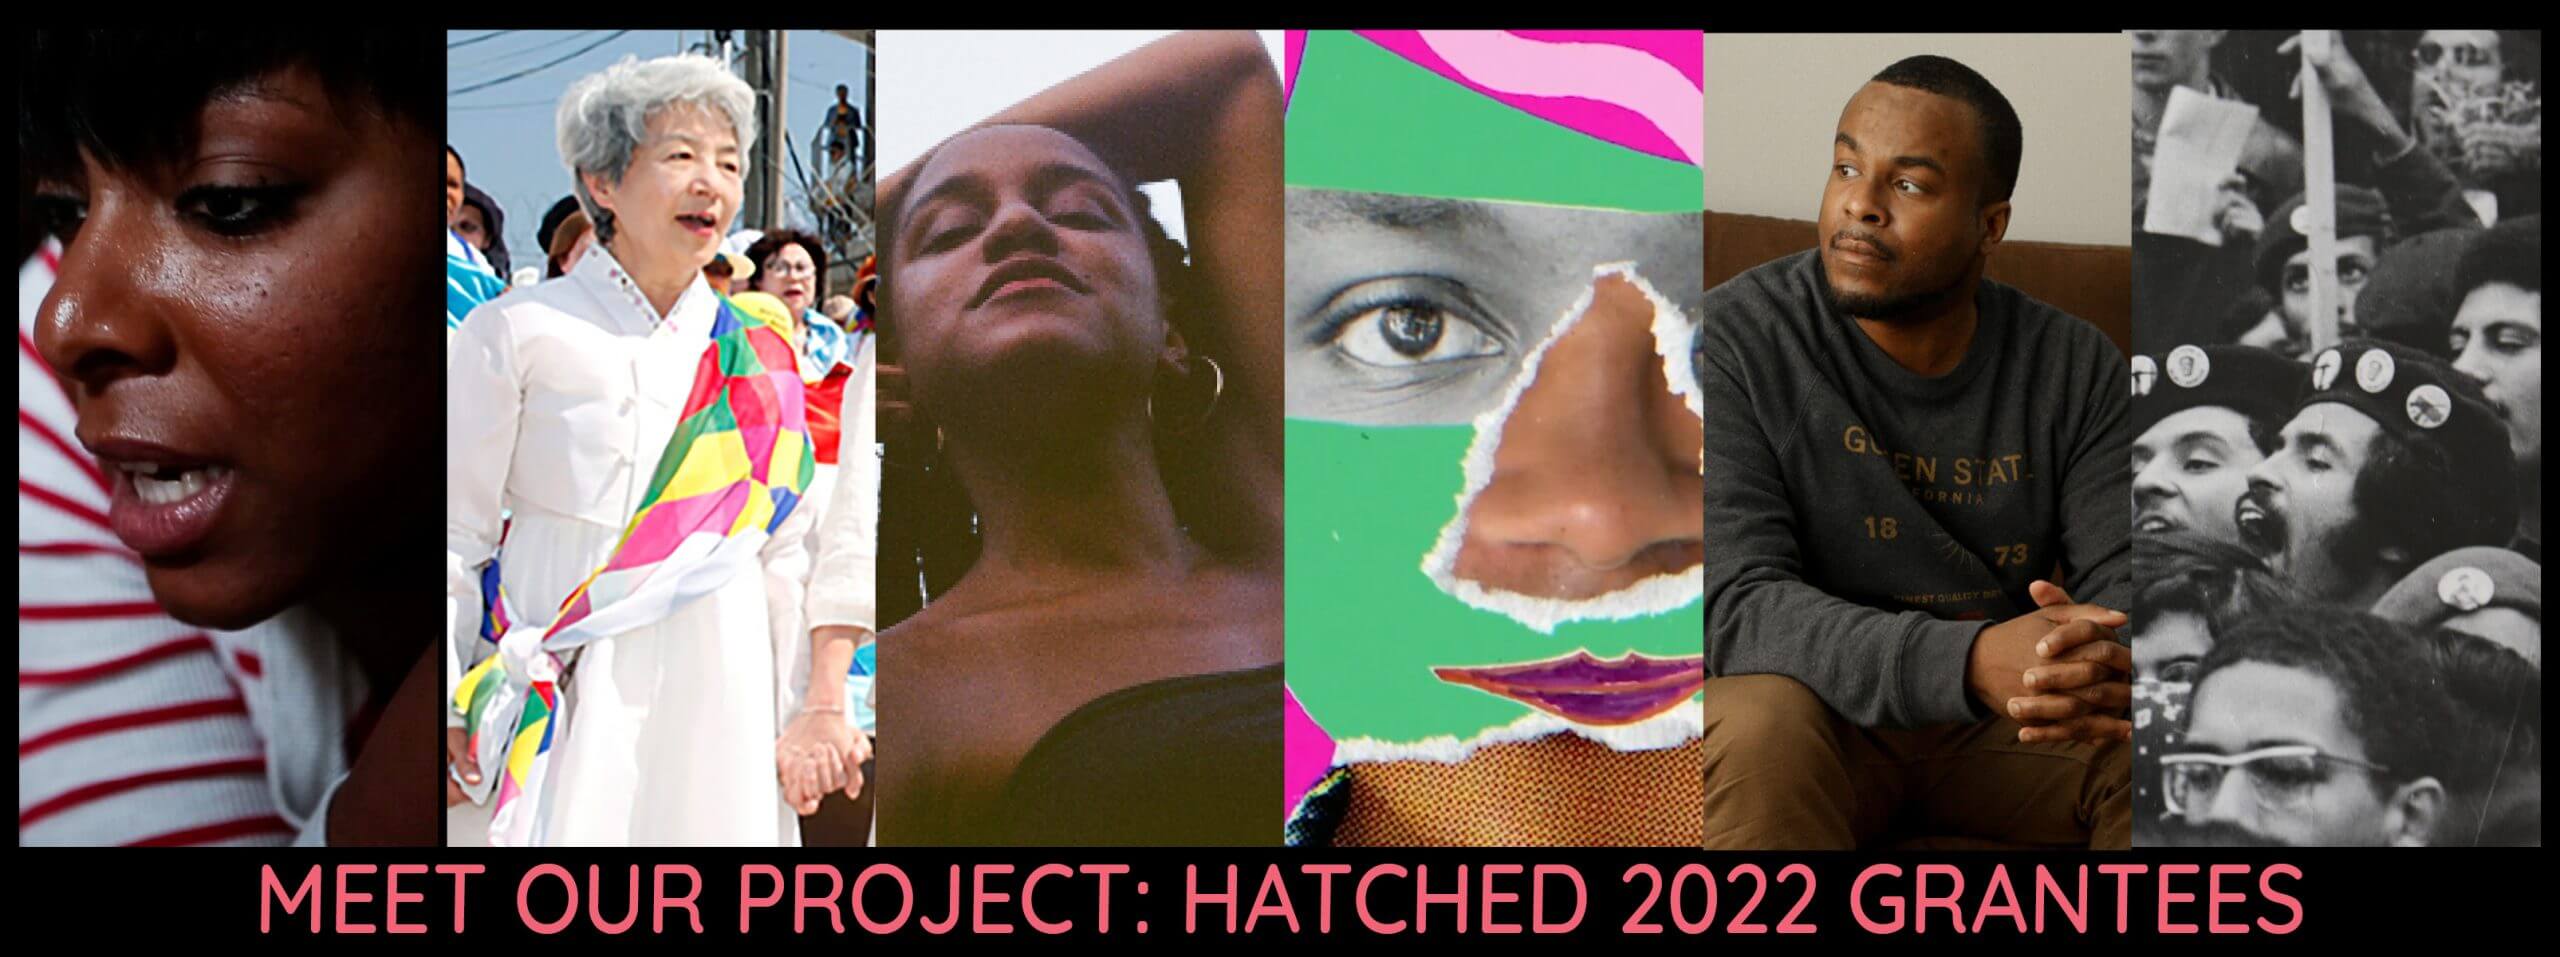 Banner with film stills of the Project: Hatched 2022 grantees that says Meet our Project: Hatched 2022 grantees